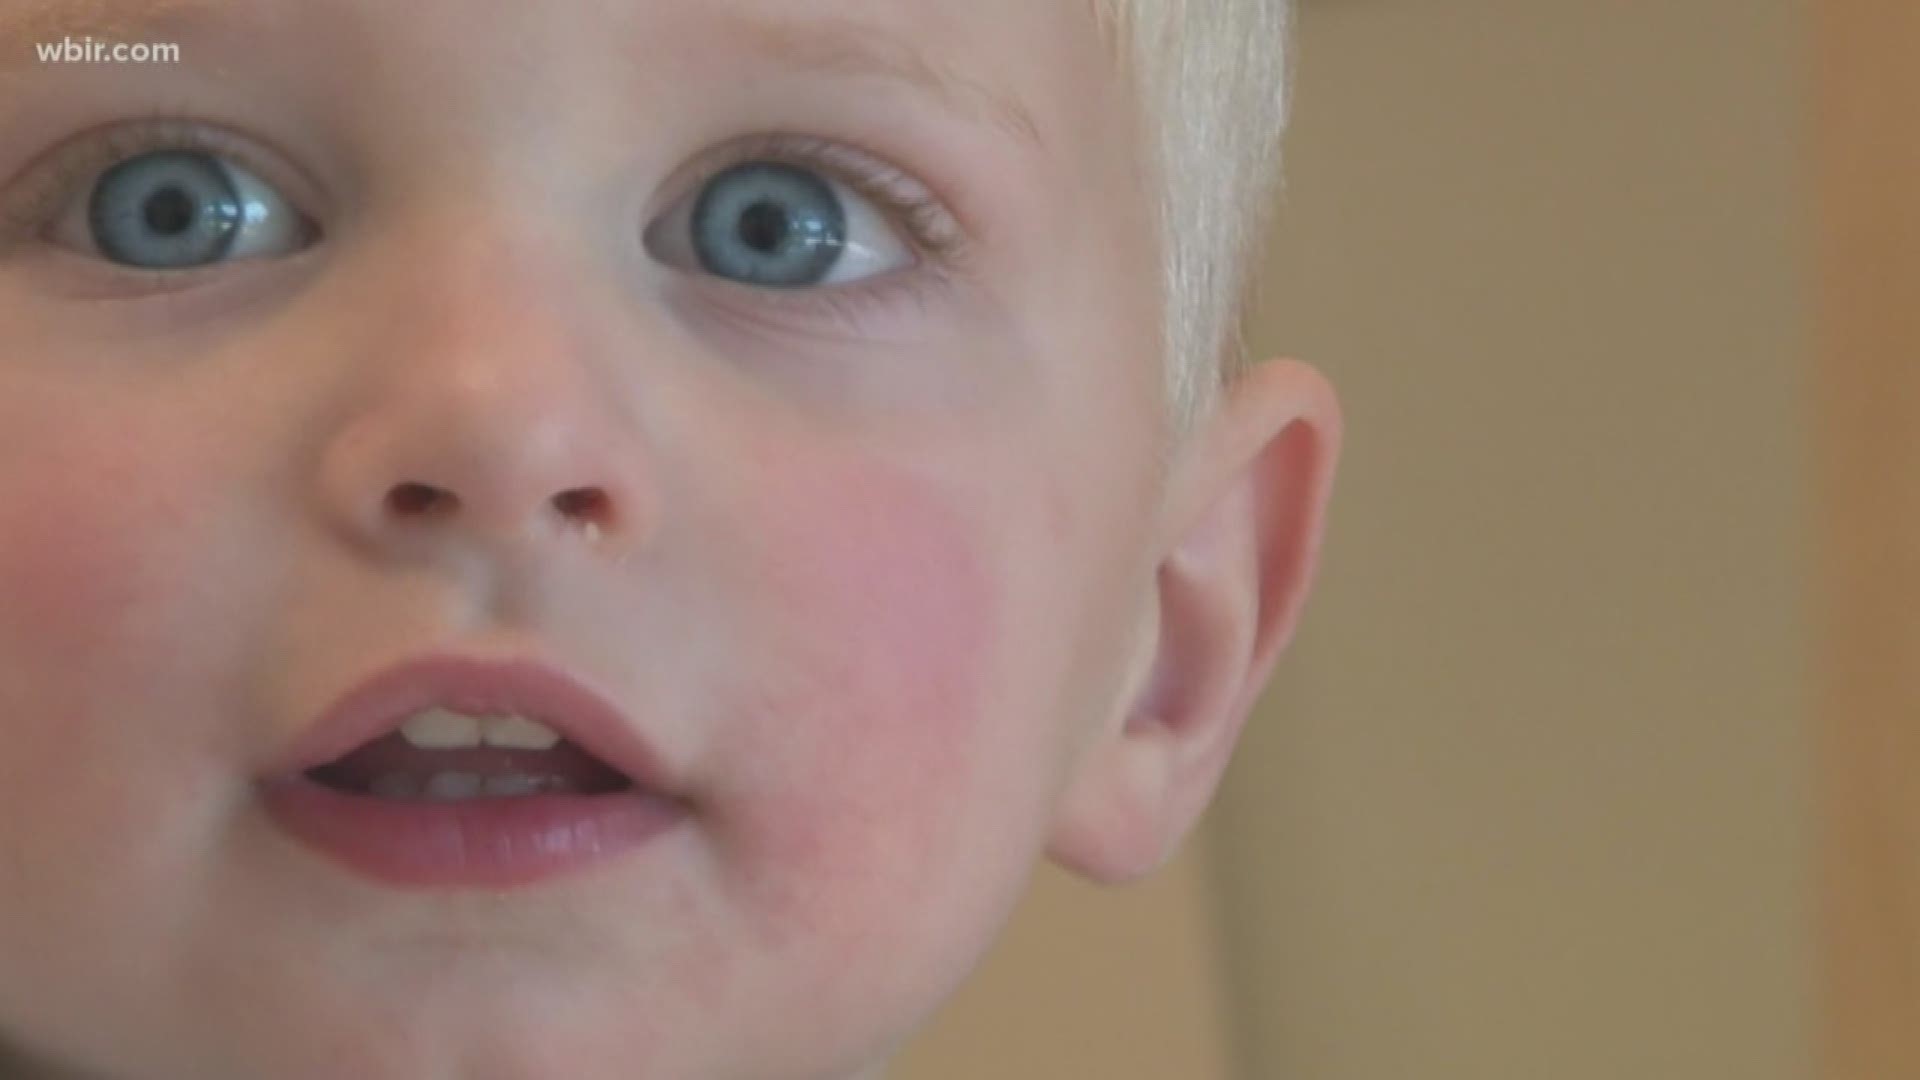 Like ordinary toddlers, Kayden is happy and full of energy. But his grandmother says there are signs he may be developing more slowly than normal.